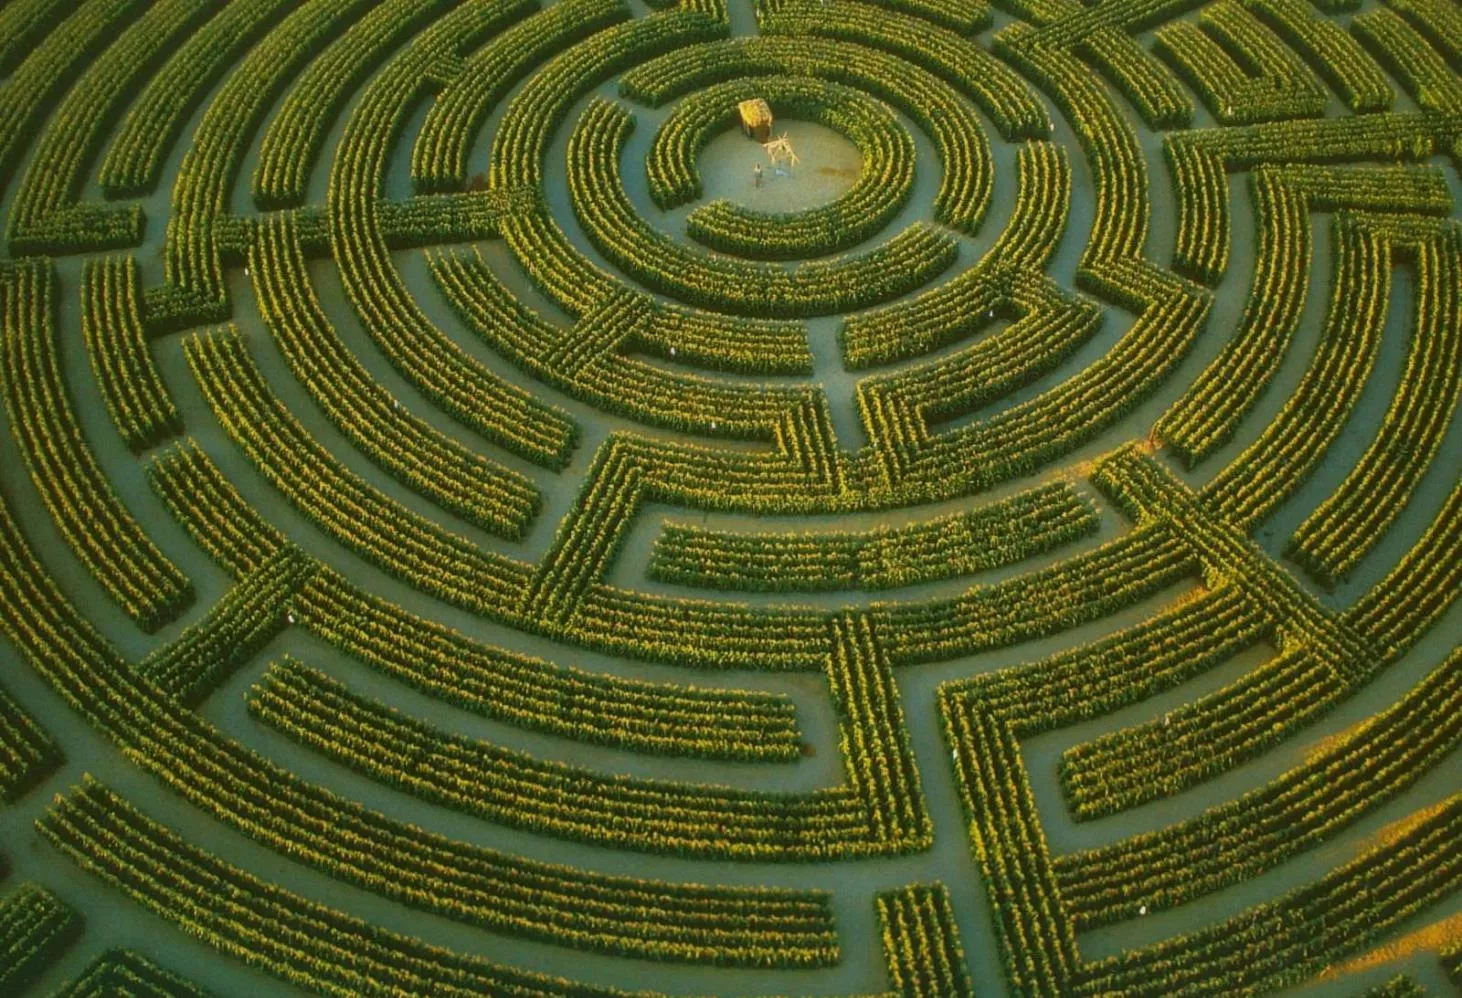 Reignac-sur-Indre in France, Europe | Labyrinths - Rated 3.6